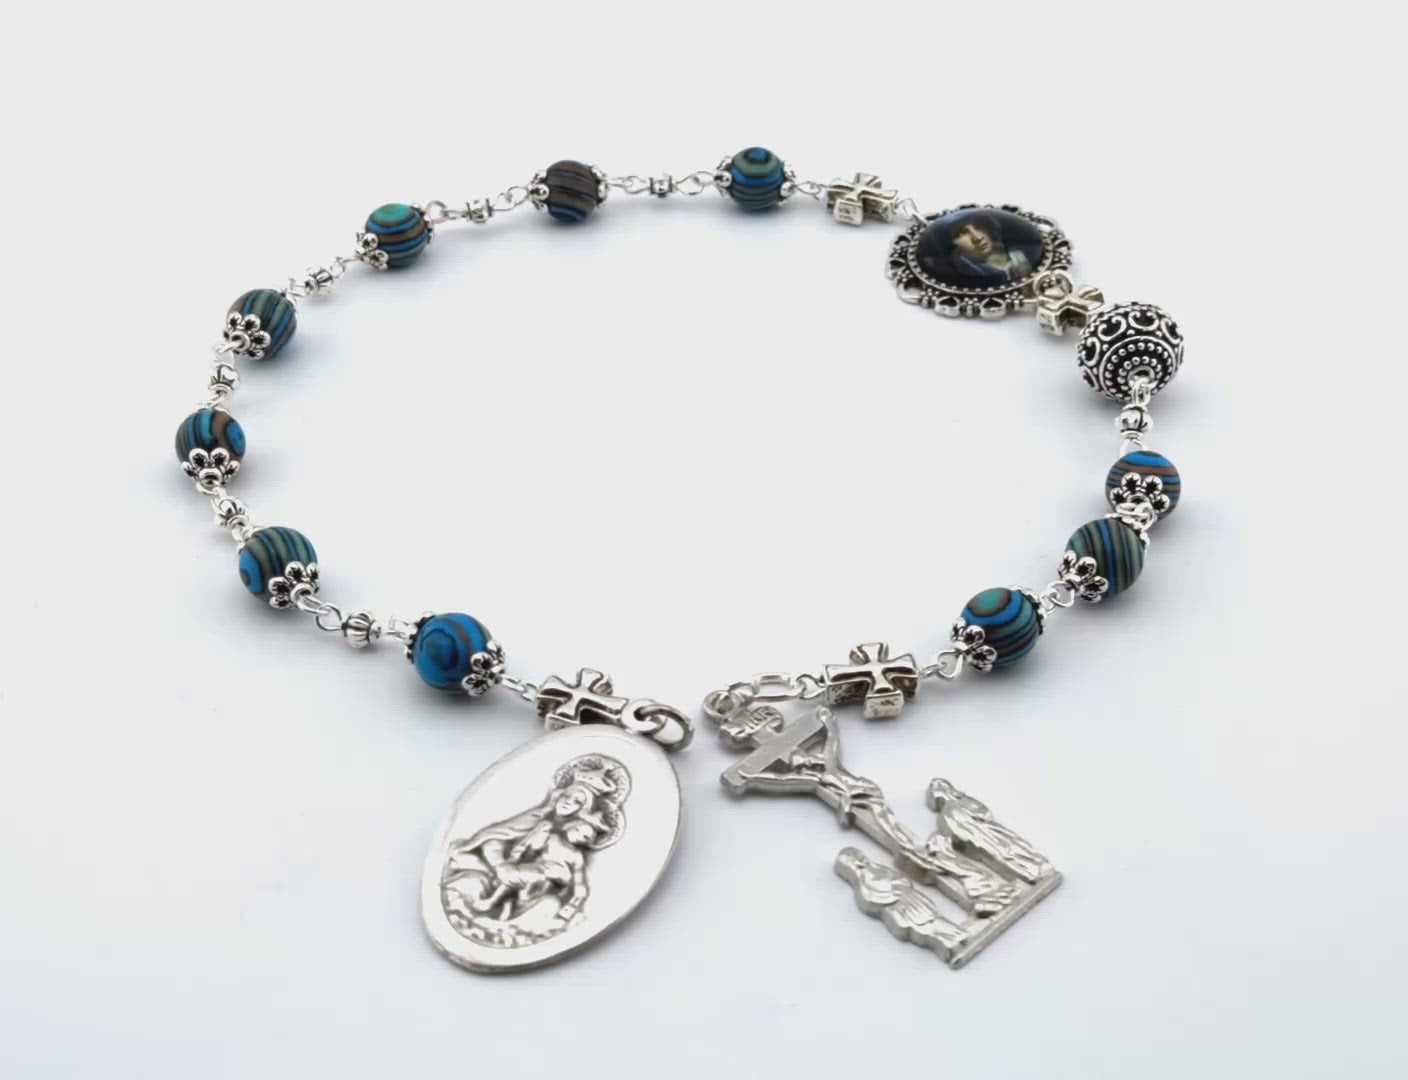 Our Lady of Sorrows unique rosary beads servite dolor rosary prayer chaplet with malachite gemstone beads, silver crucifix, Our Lady of Mount Carmel medal and small picture medal.